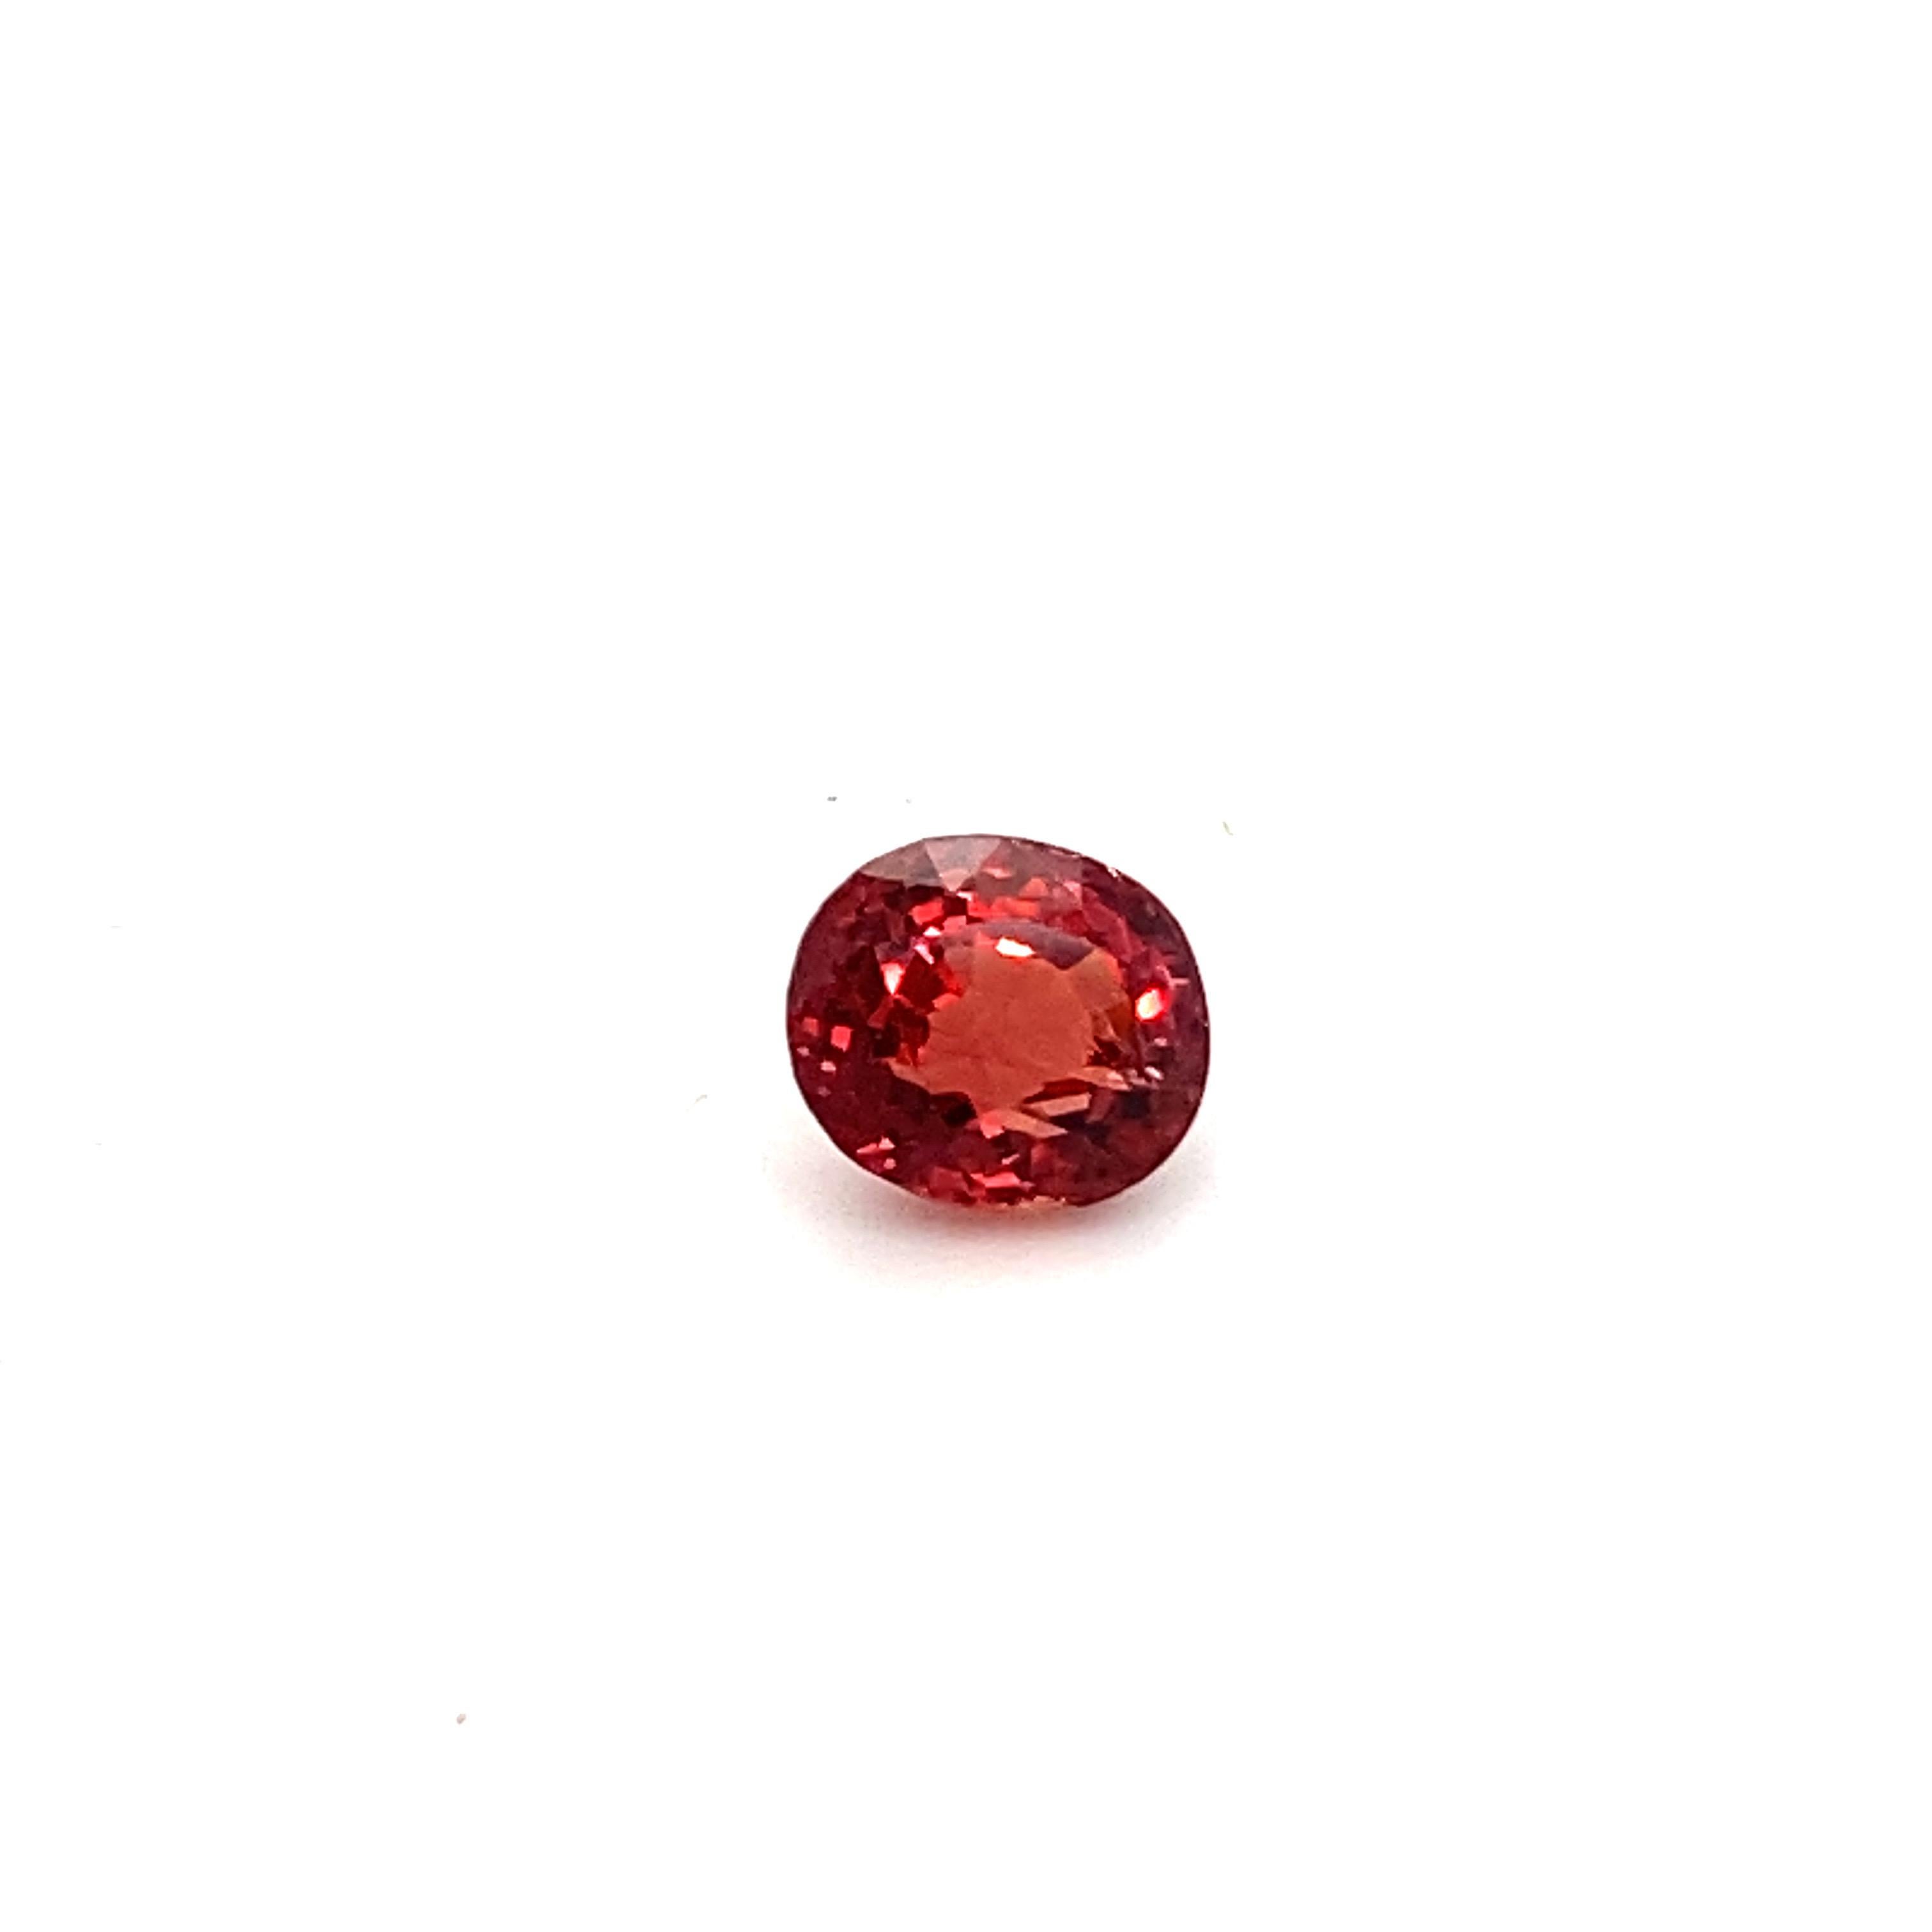 This 2.10 carat oval shape natural red spinel loose gemstone is carefully hand cut and hand polished by skilled artisans. This lustrous loose gemstone can be created into any stunning piece of jewelry according to your choice.
Spinel is the birth